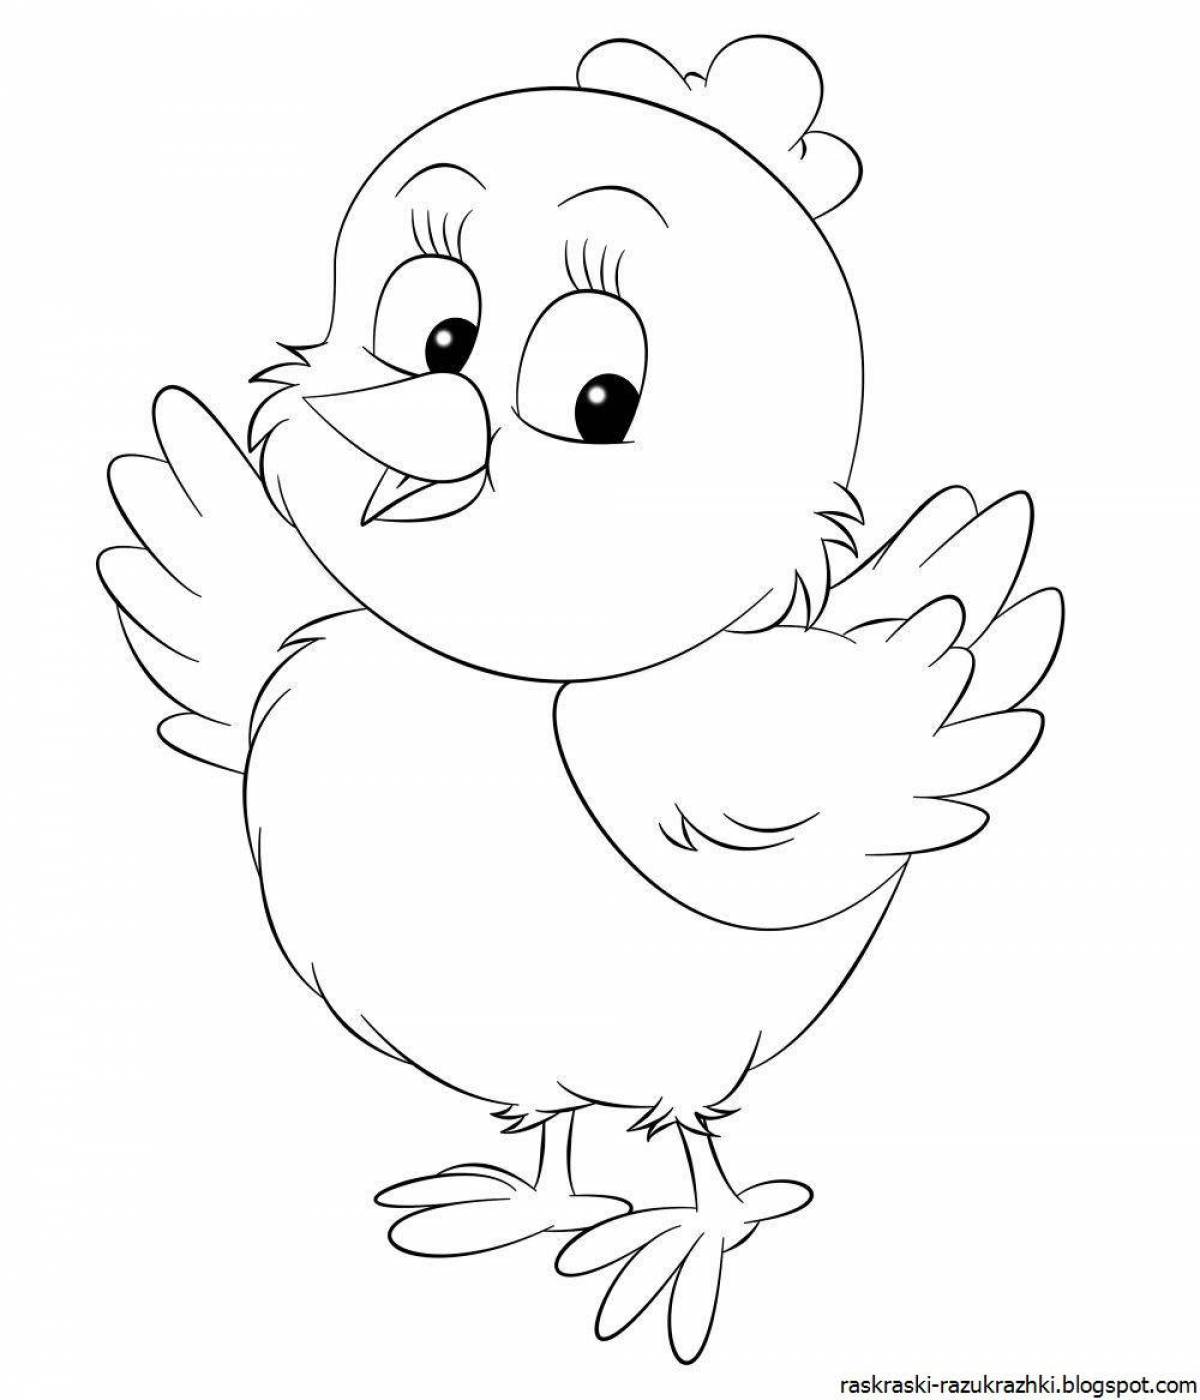 Glittering chick coloring page for 2-3 year olds